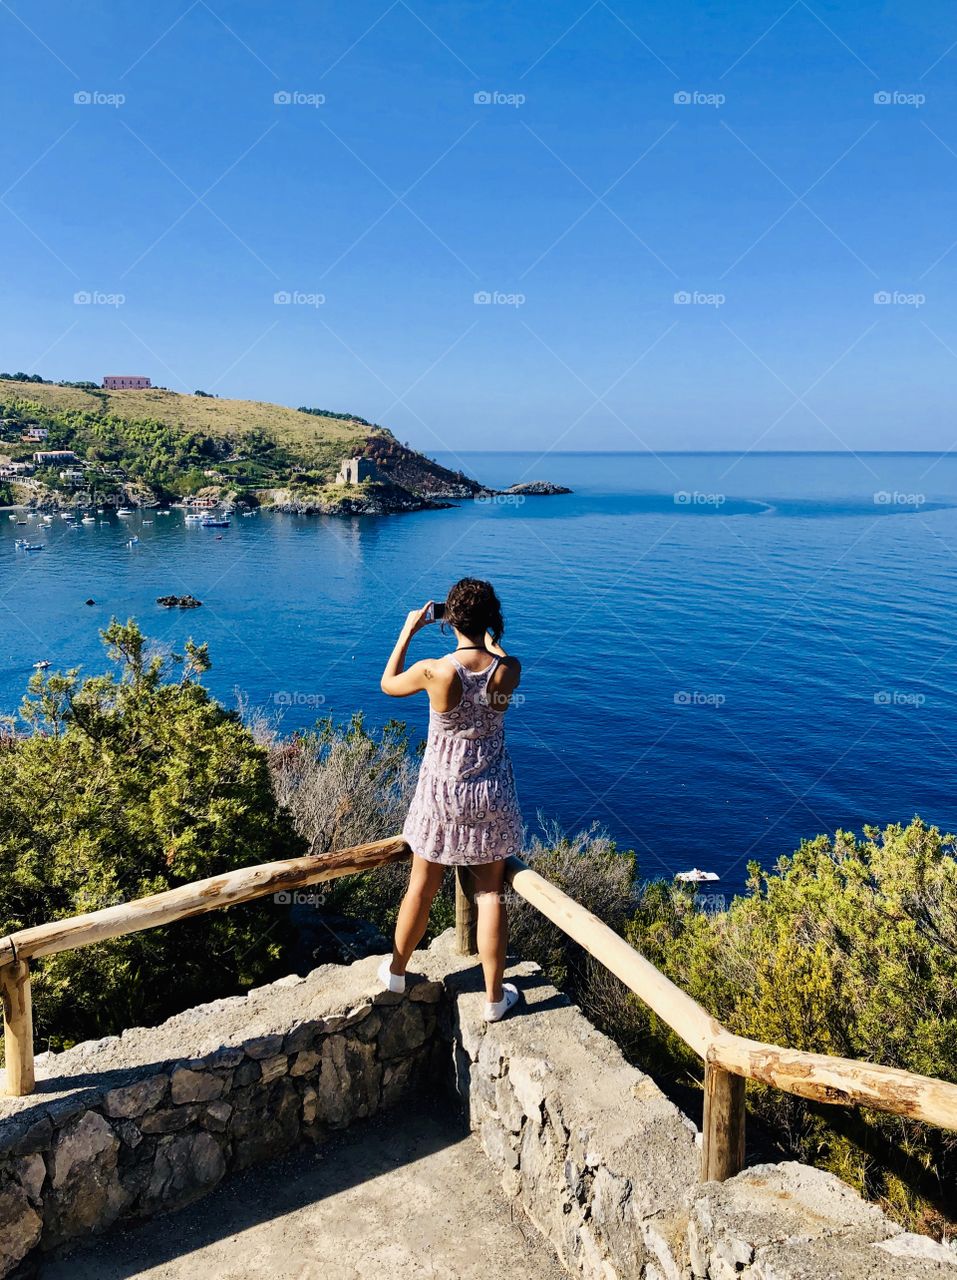 Taking pictures of an amazing view, Calabria, South Italy 